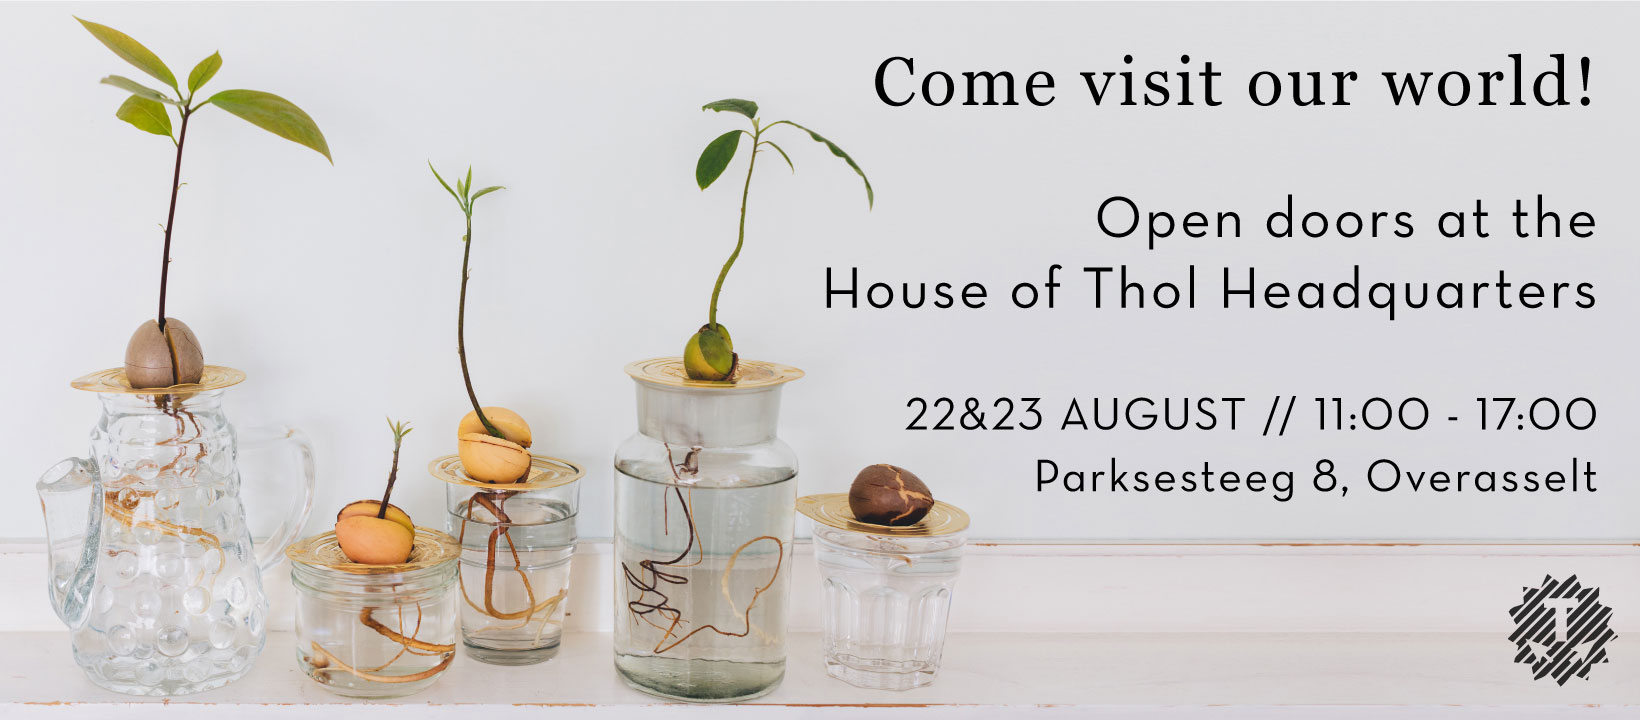 Open Doors at the House of Thol Headquartes 22&23 August 2020 / House of Thol / photograph by Masha Bakker Photography